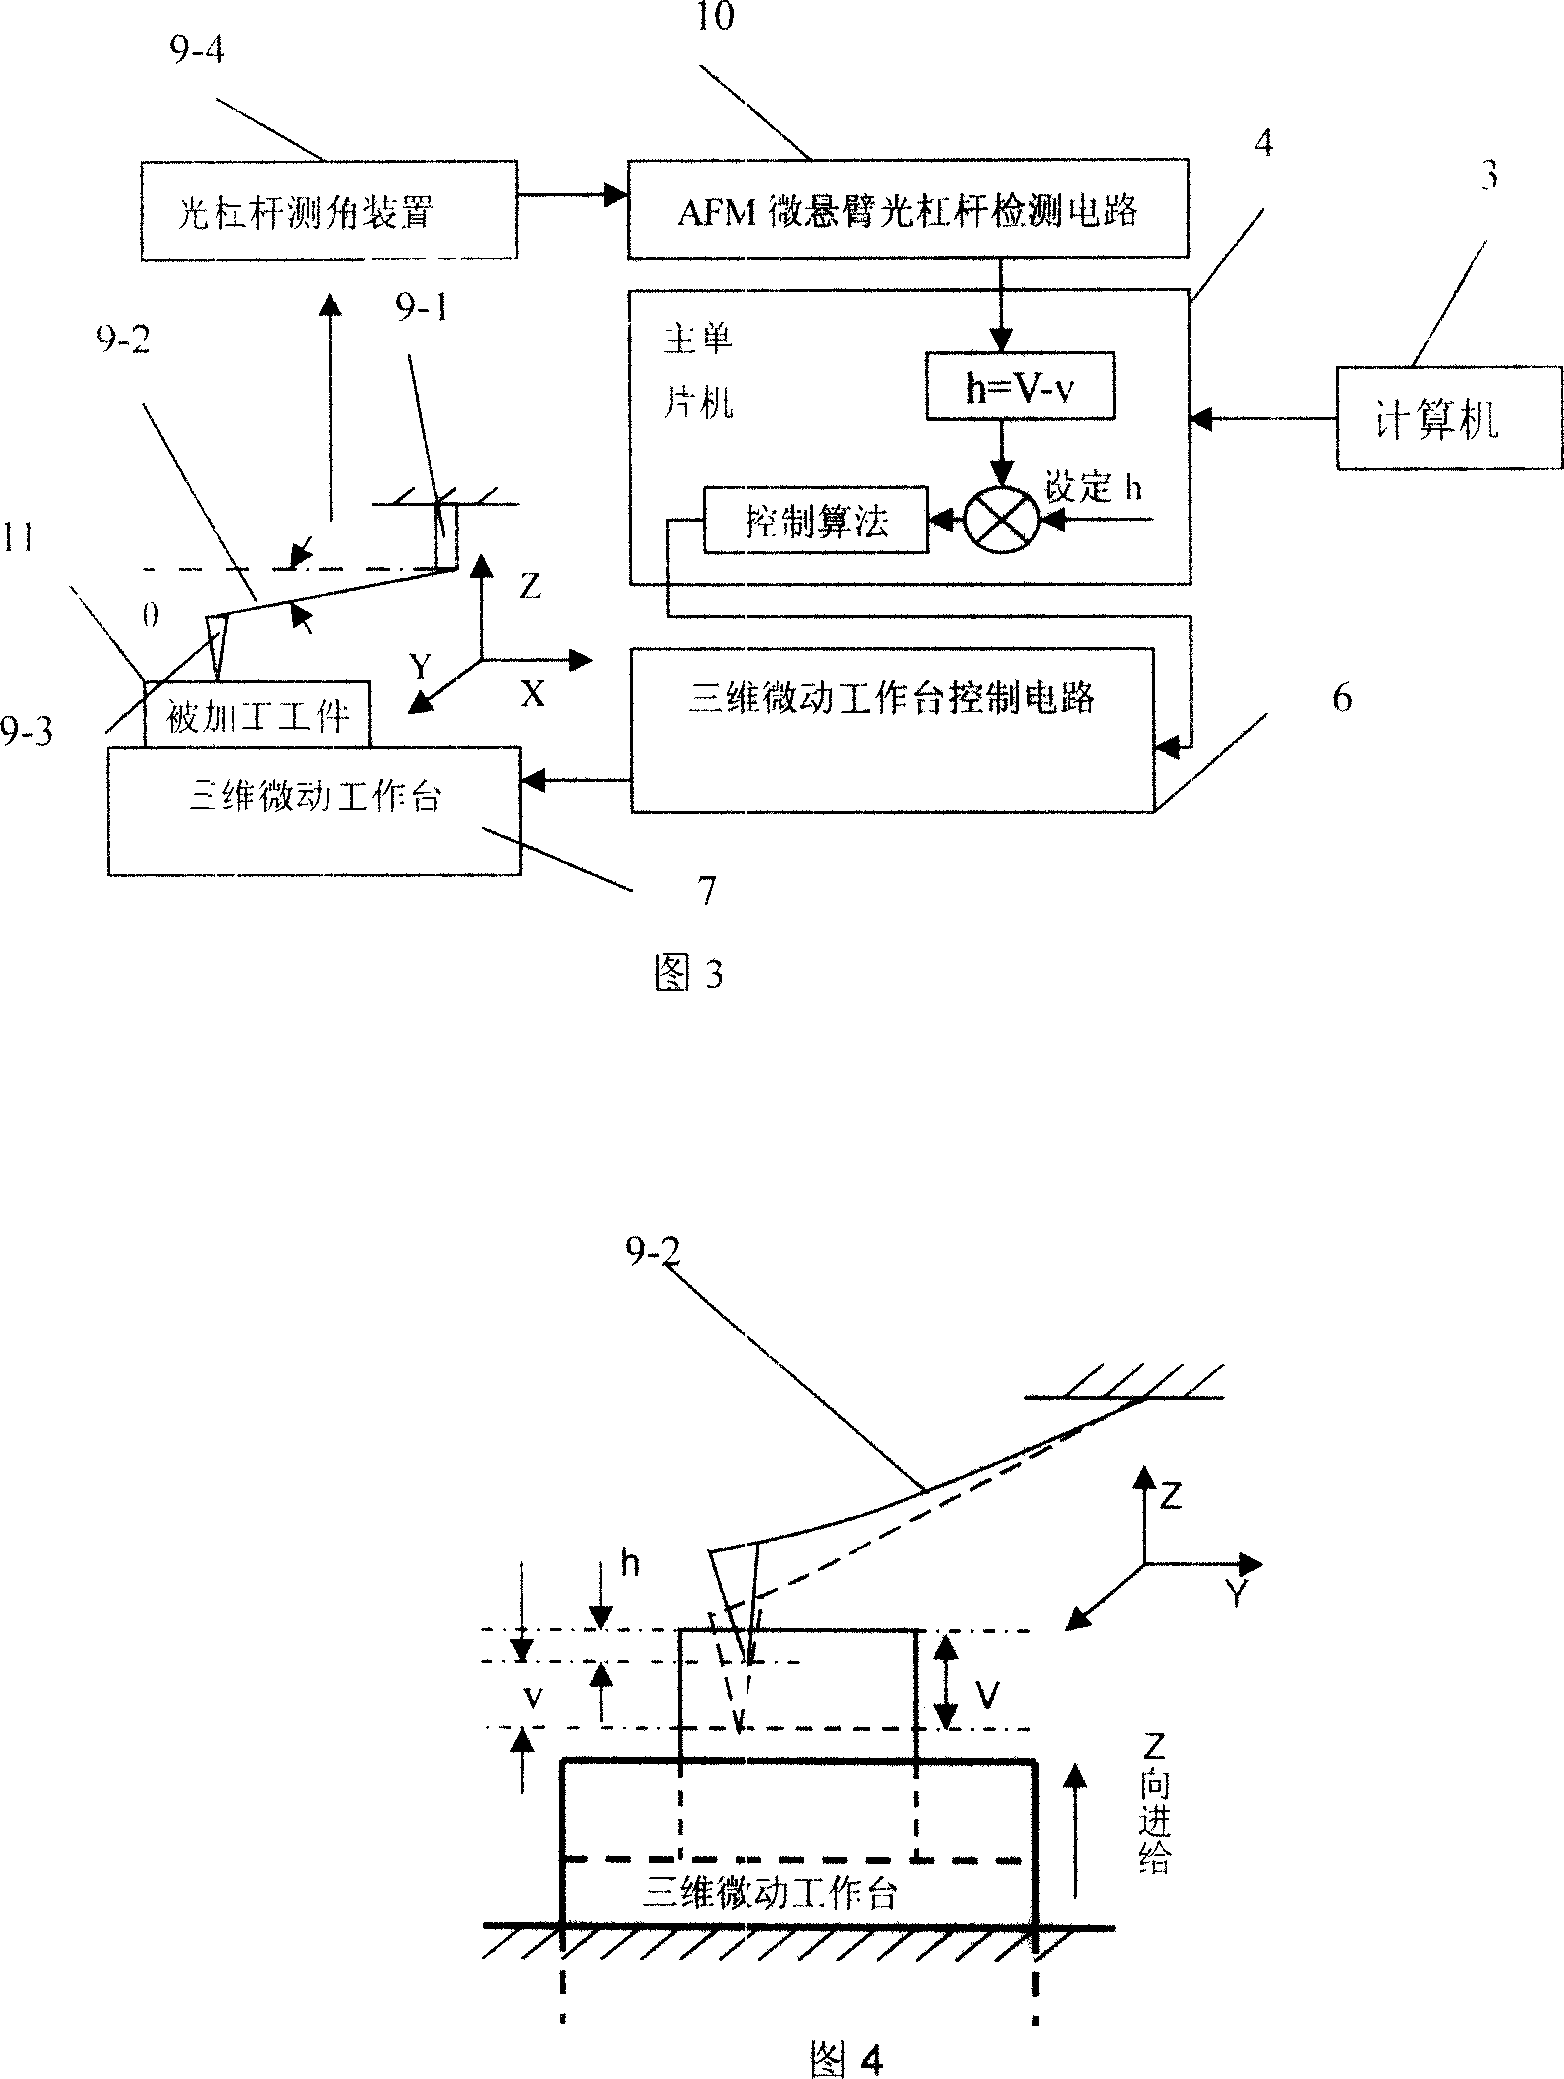 Method for making Nano microstructure based on constant height mode of atomic force microscope